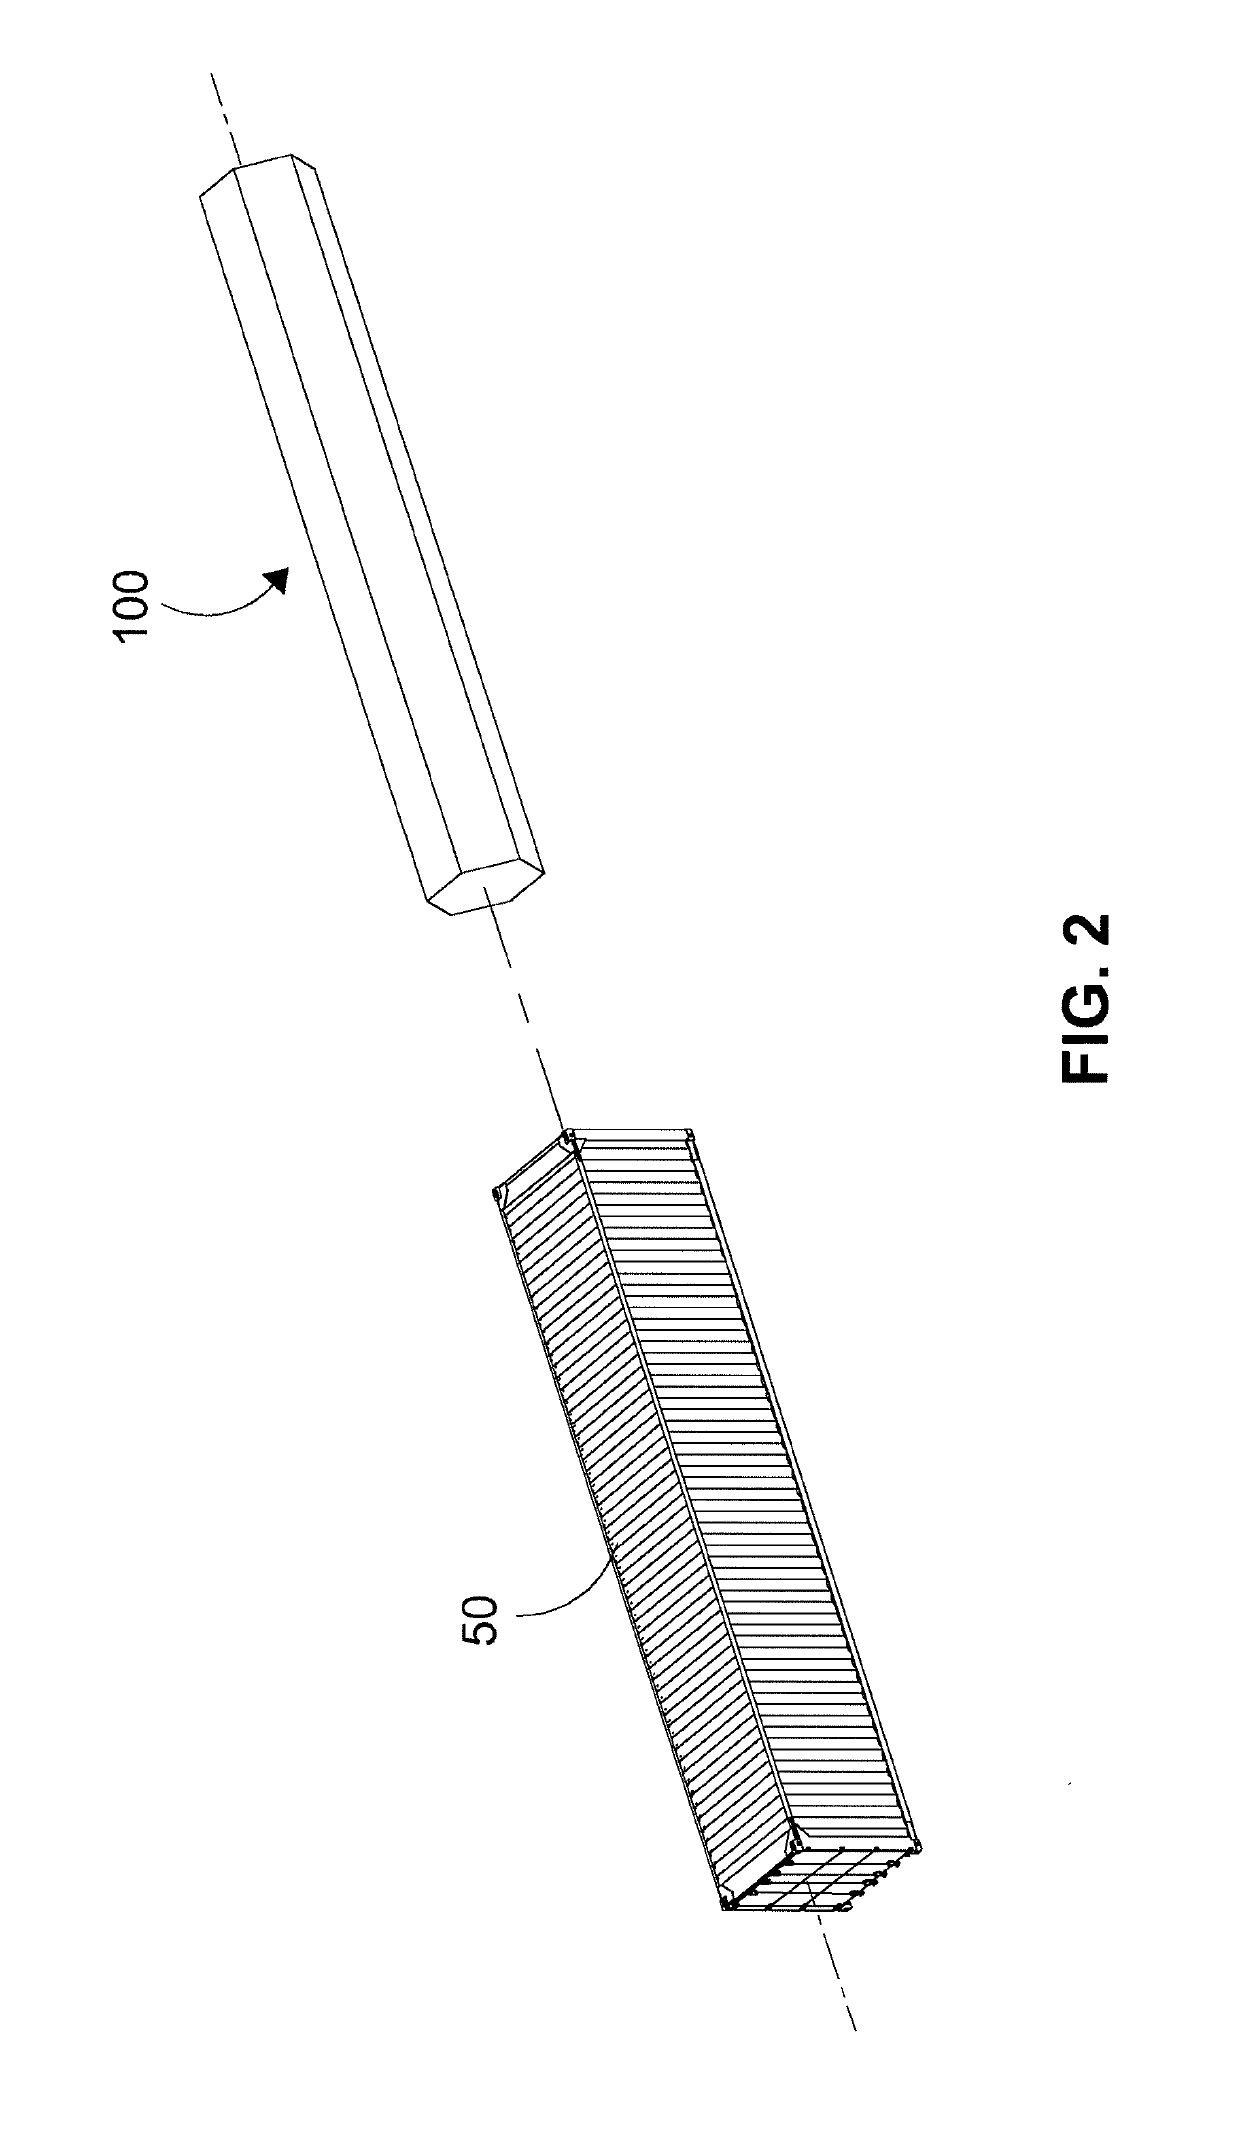 Controllable float module, a modular offshore structure assembly comprising at least one controllable float module and a method for assembling a modular offshore structure in situ